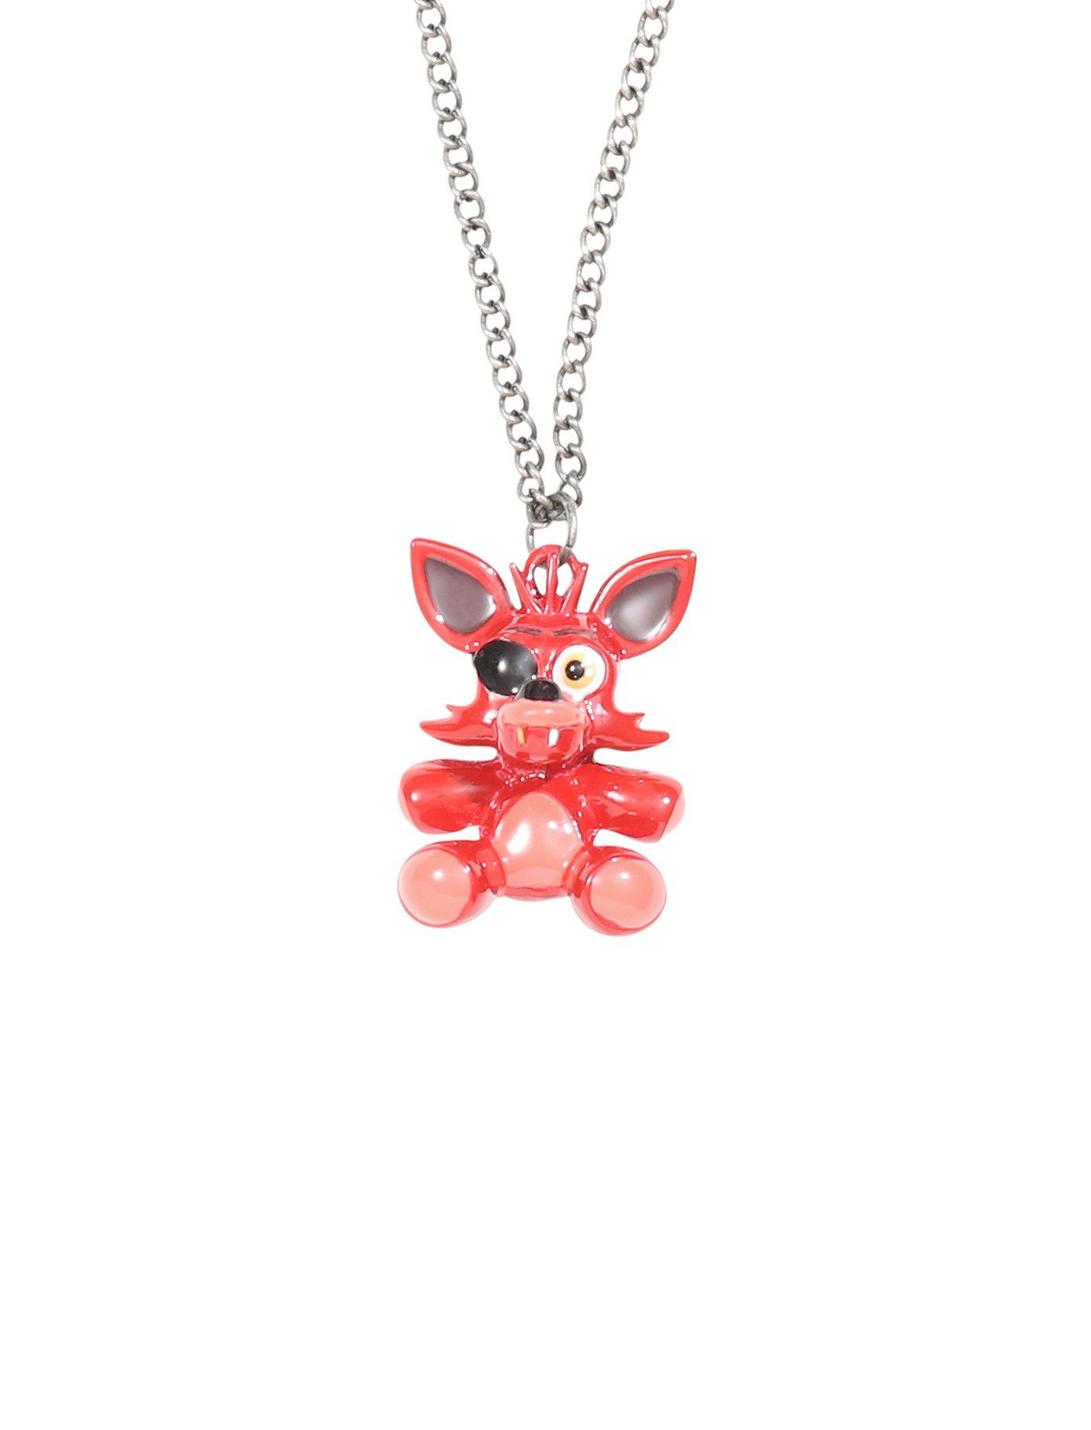 Five Nights At Freddy's Foxy 3D Necklace